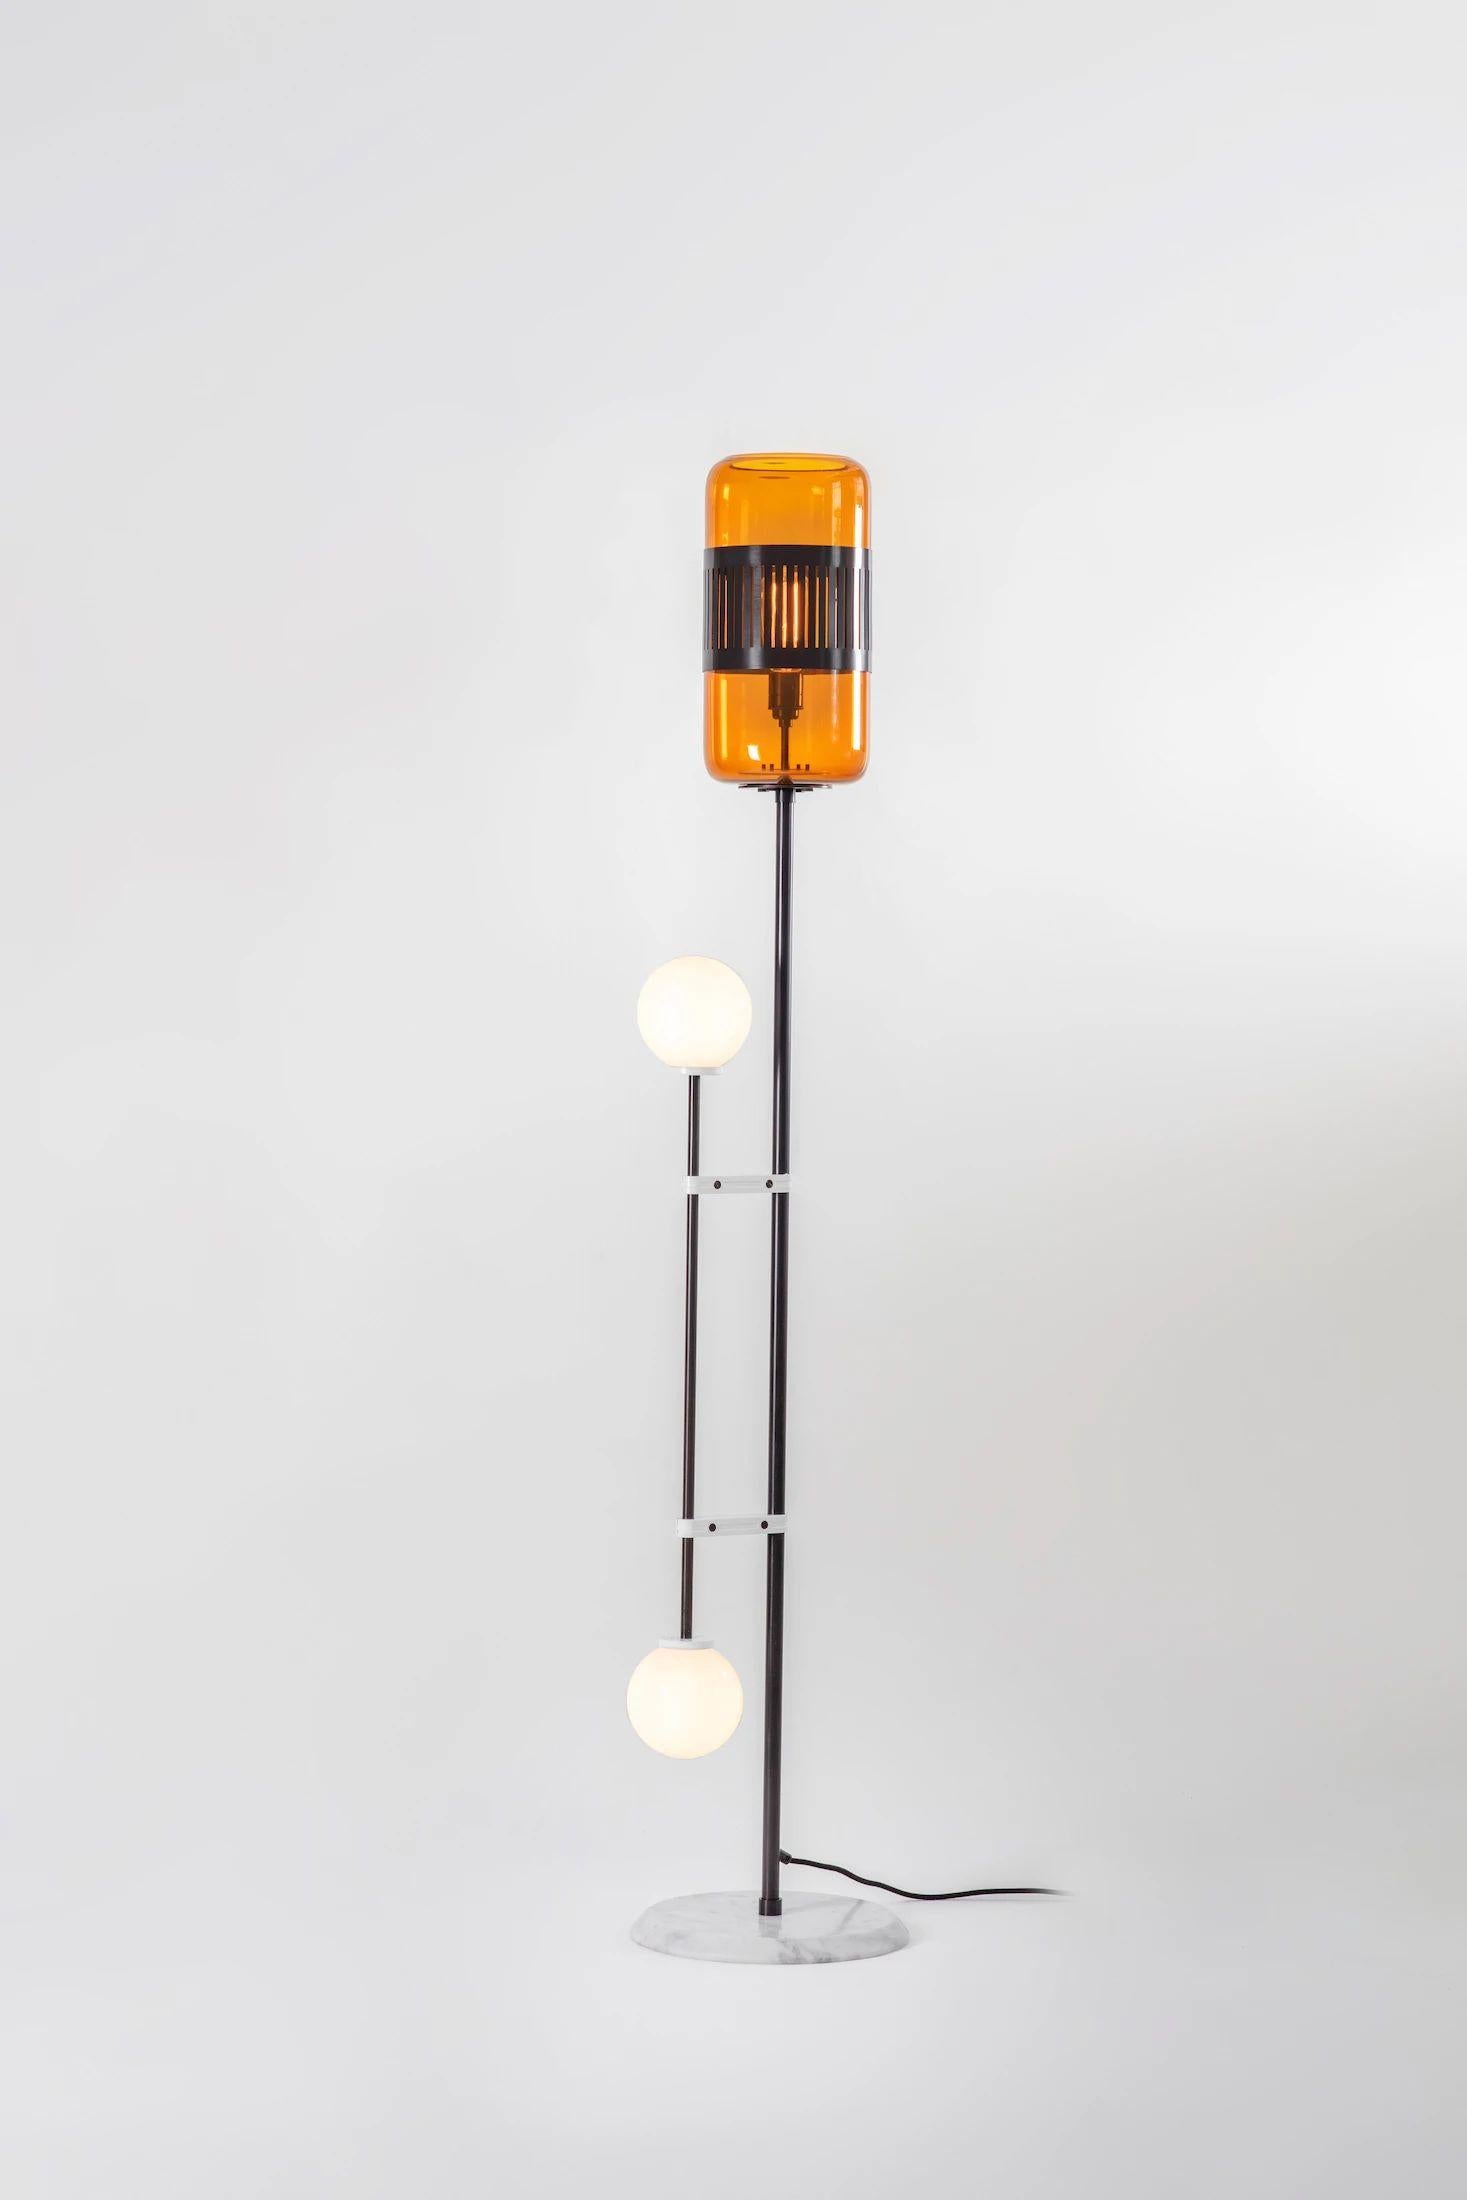 Amber glass Lizak floor lamp by Bert Frank.
Dimensions: 30 x 30 x 159 cm.
Materials: bronze and glass.

Available finishes: brass, opal and blue
All our lamps can be wired according to each country. If sold to the USA it will be wired for the